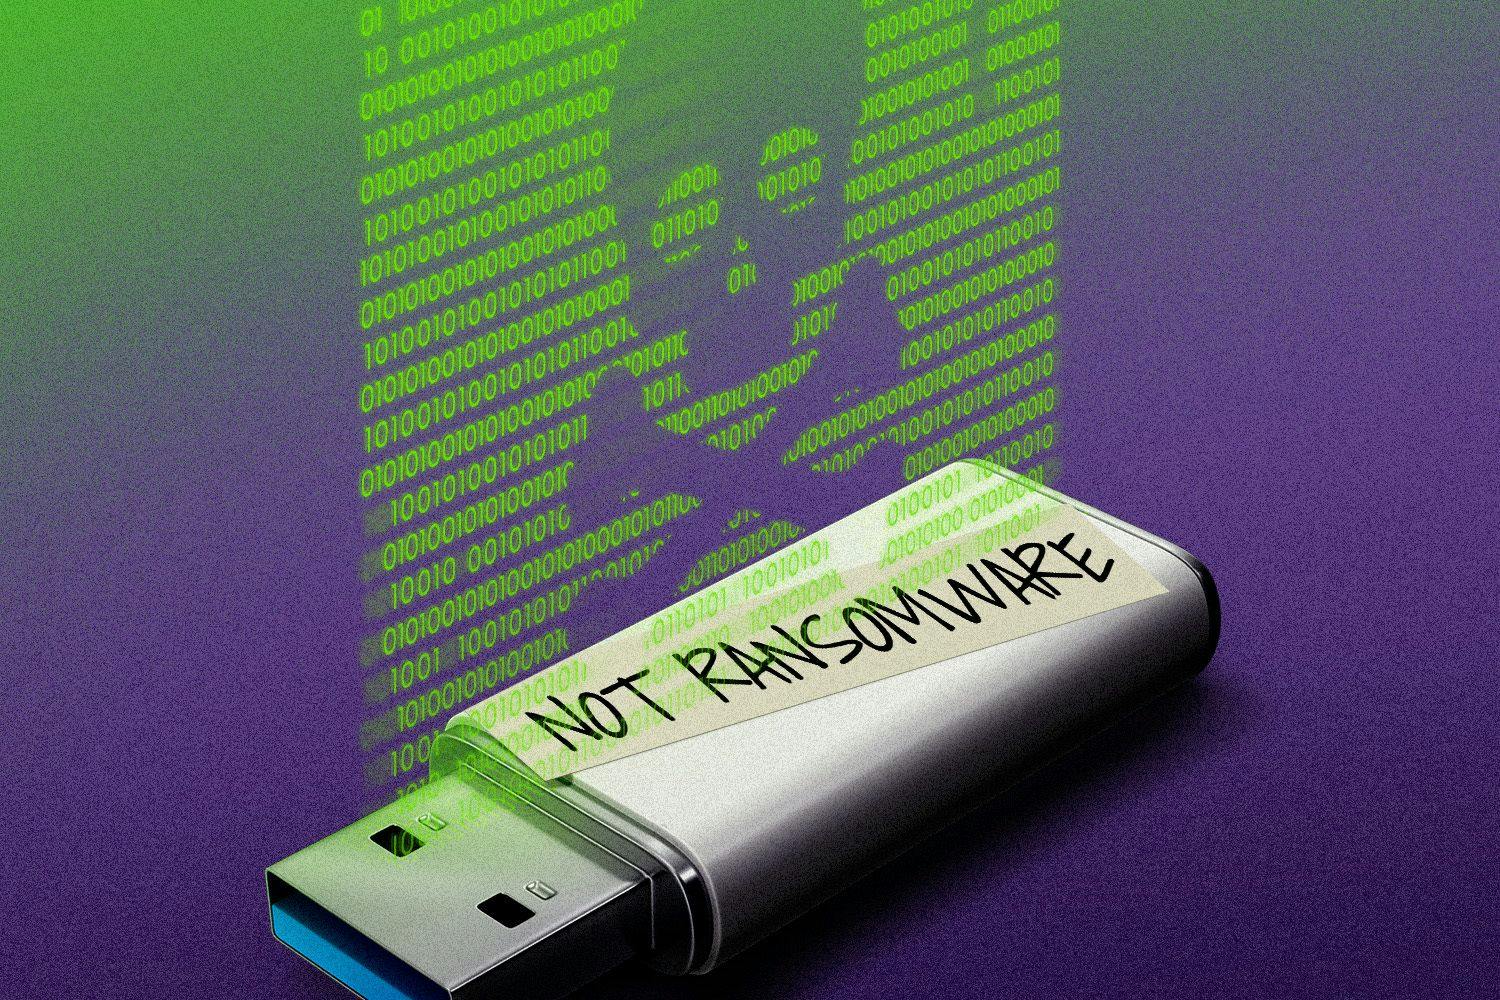 A USB drive with "not ransonware" written on masking tape.